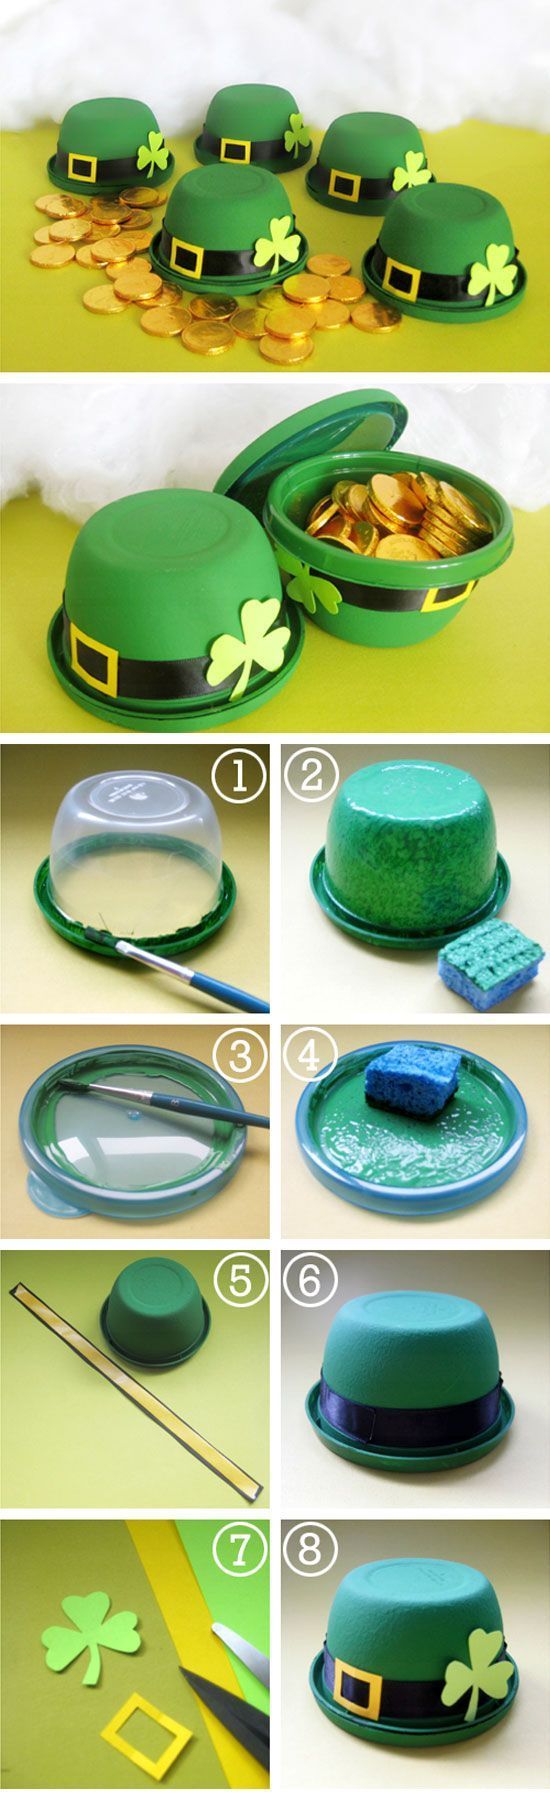 20 St Patricks Day Crafts for Kids to Make Save for next year…